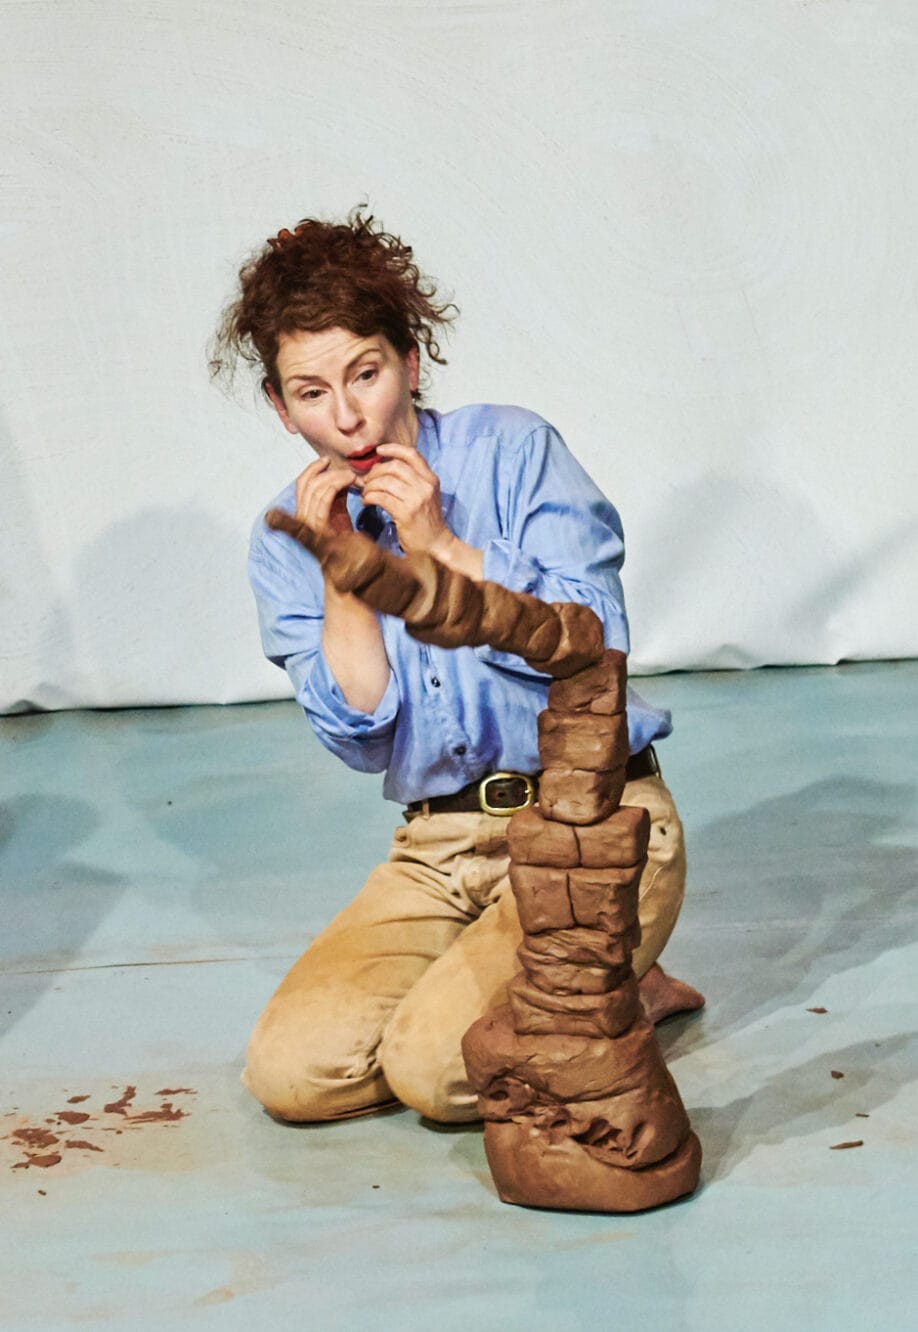 Claytime performer looks on nervously as a huge clay tower topples over!